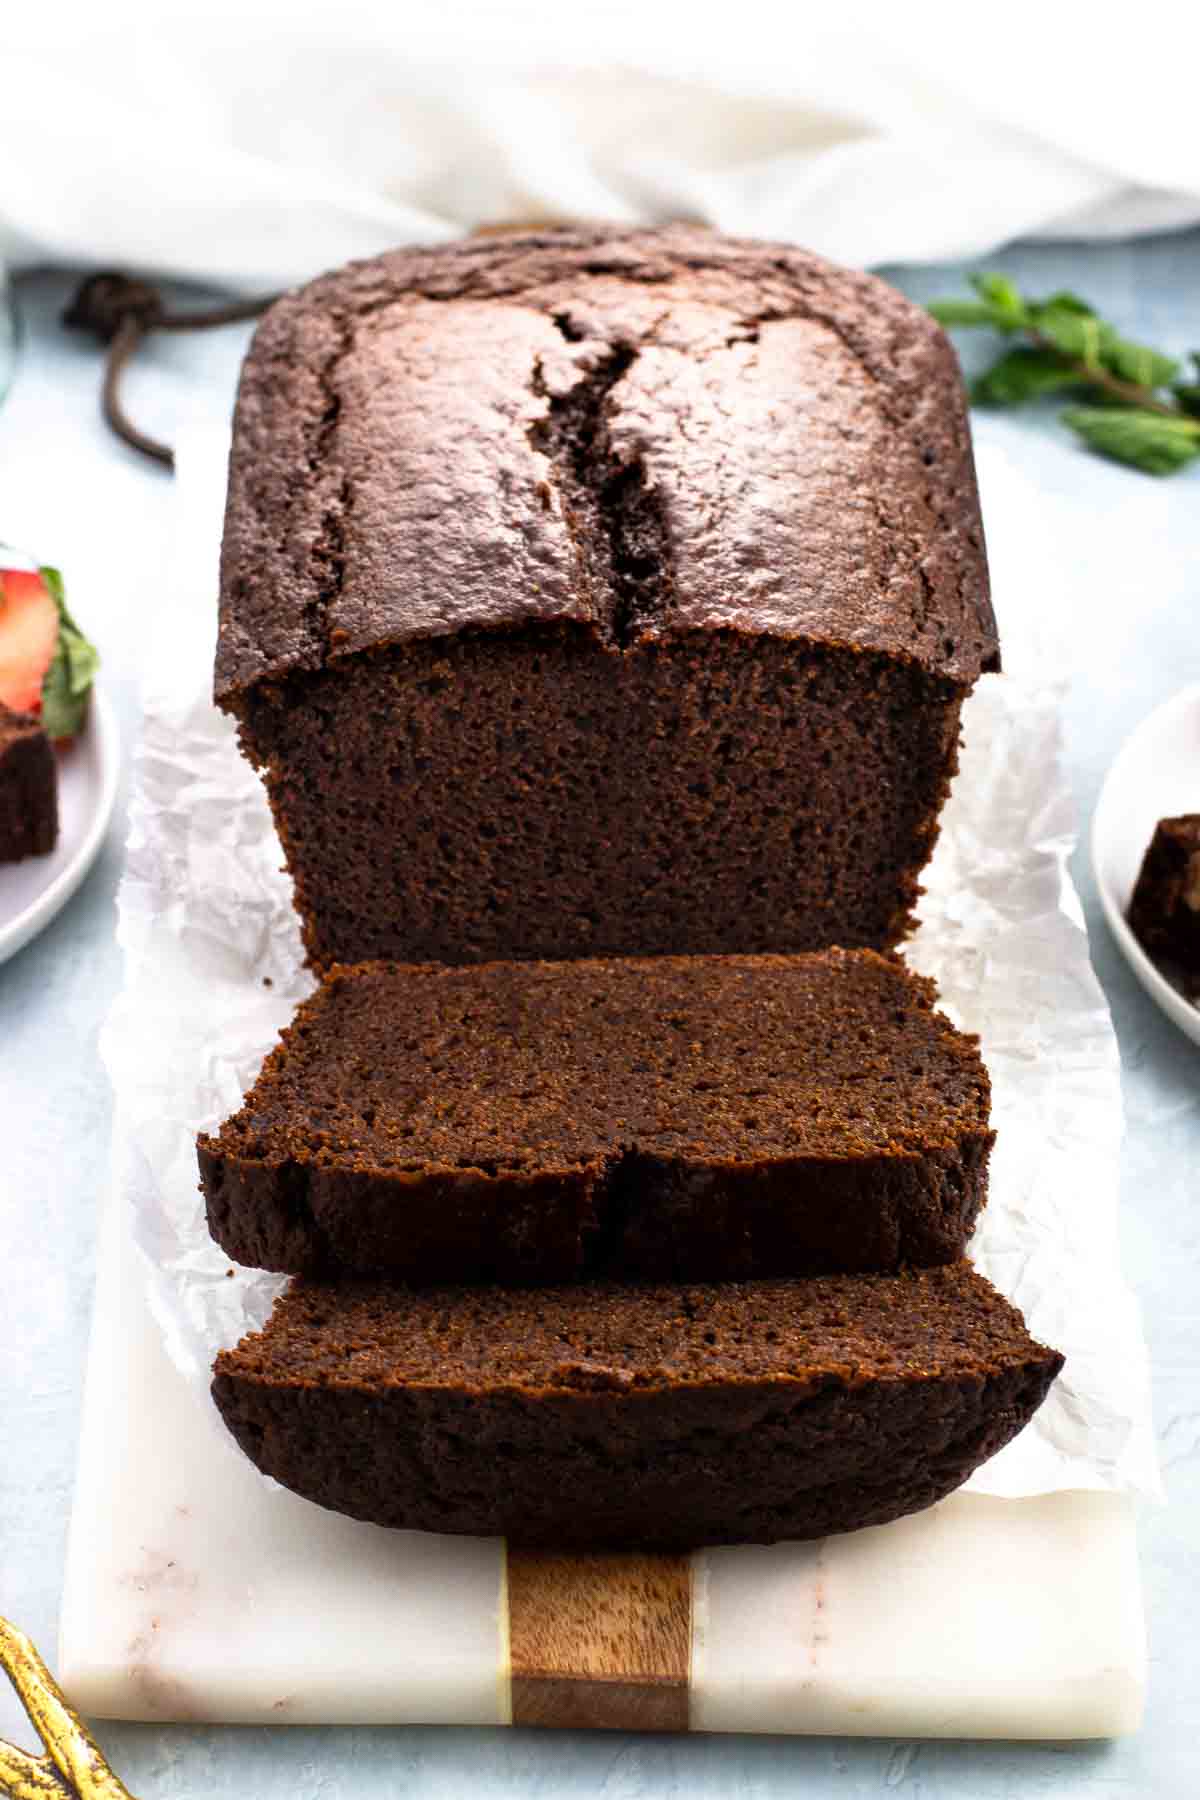 A straight-on view of a partially-sliced chocolate yogurt cake loaf.